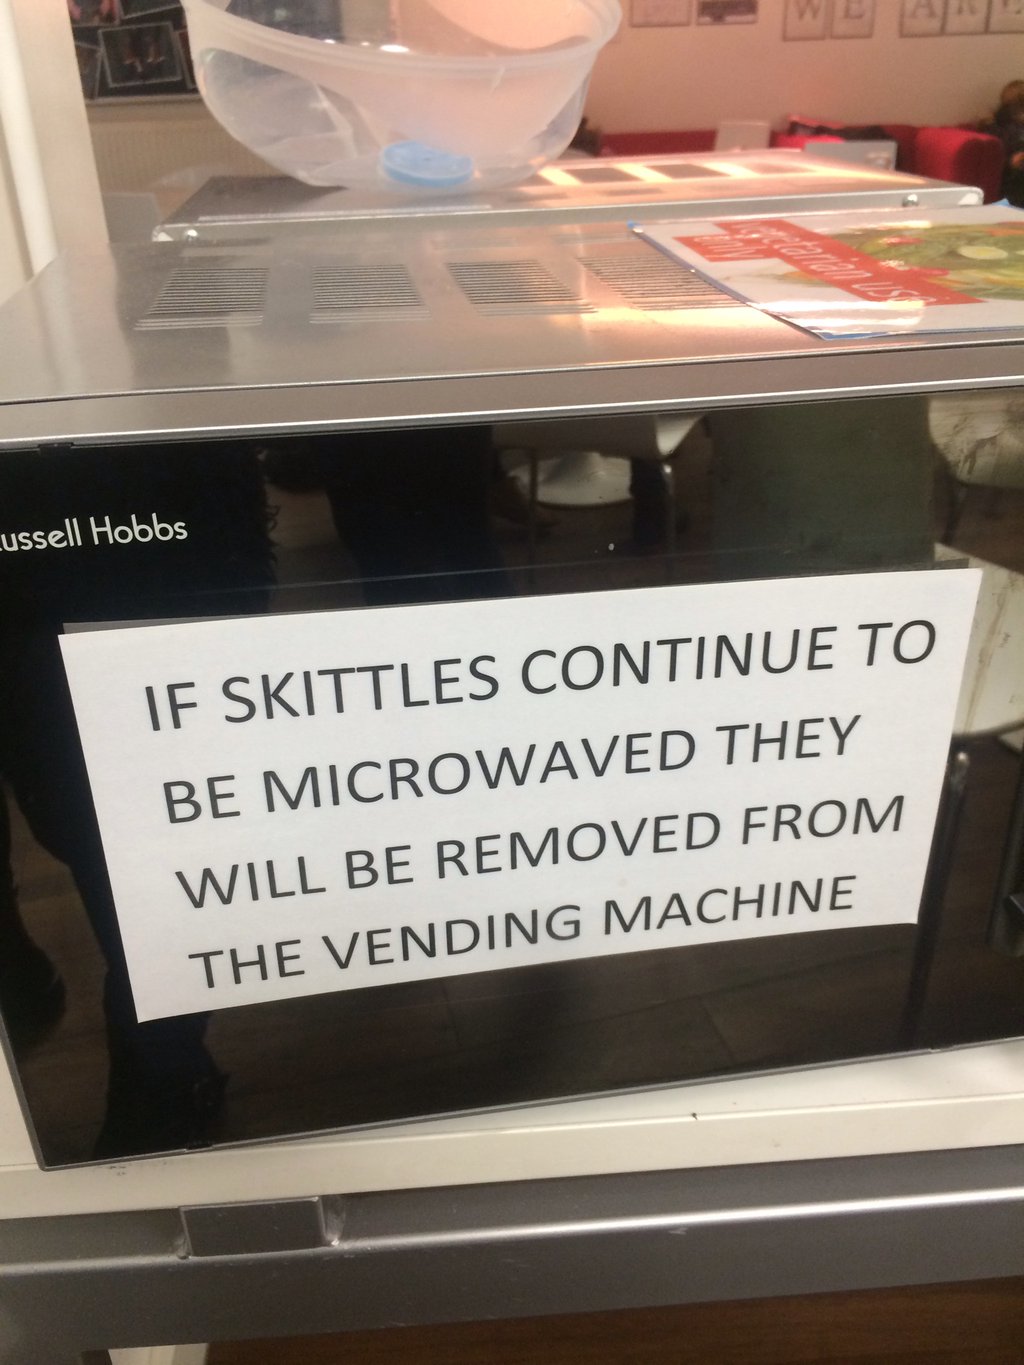 table - Lussell Hobbs If Skittles Continue To Be Microwaved They Will Be Removed From The Vending Machine